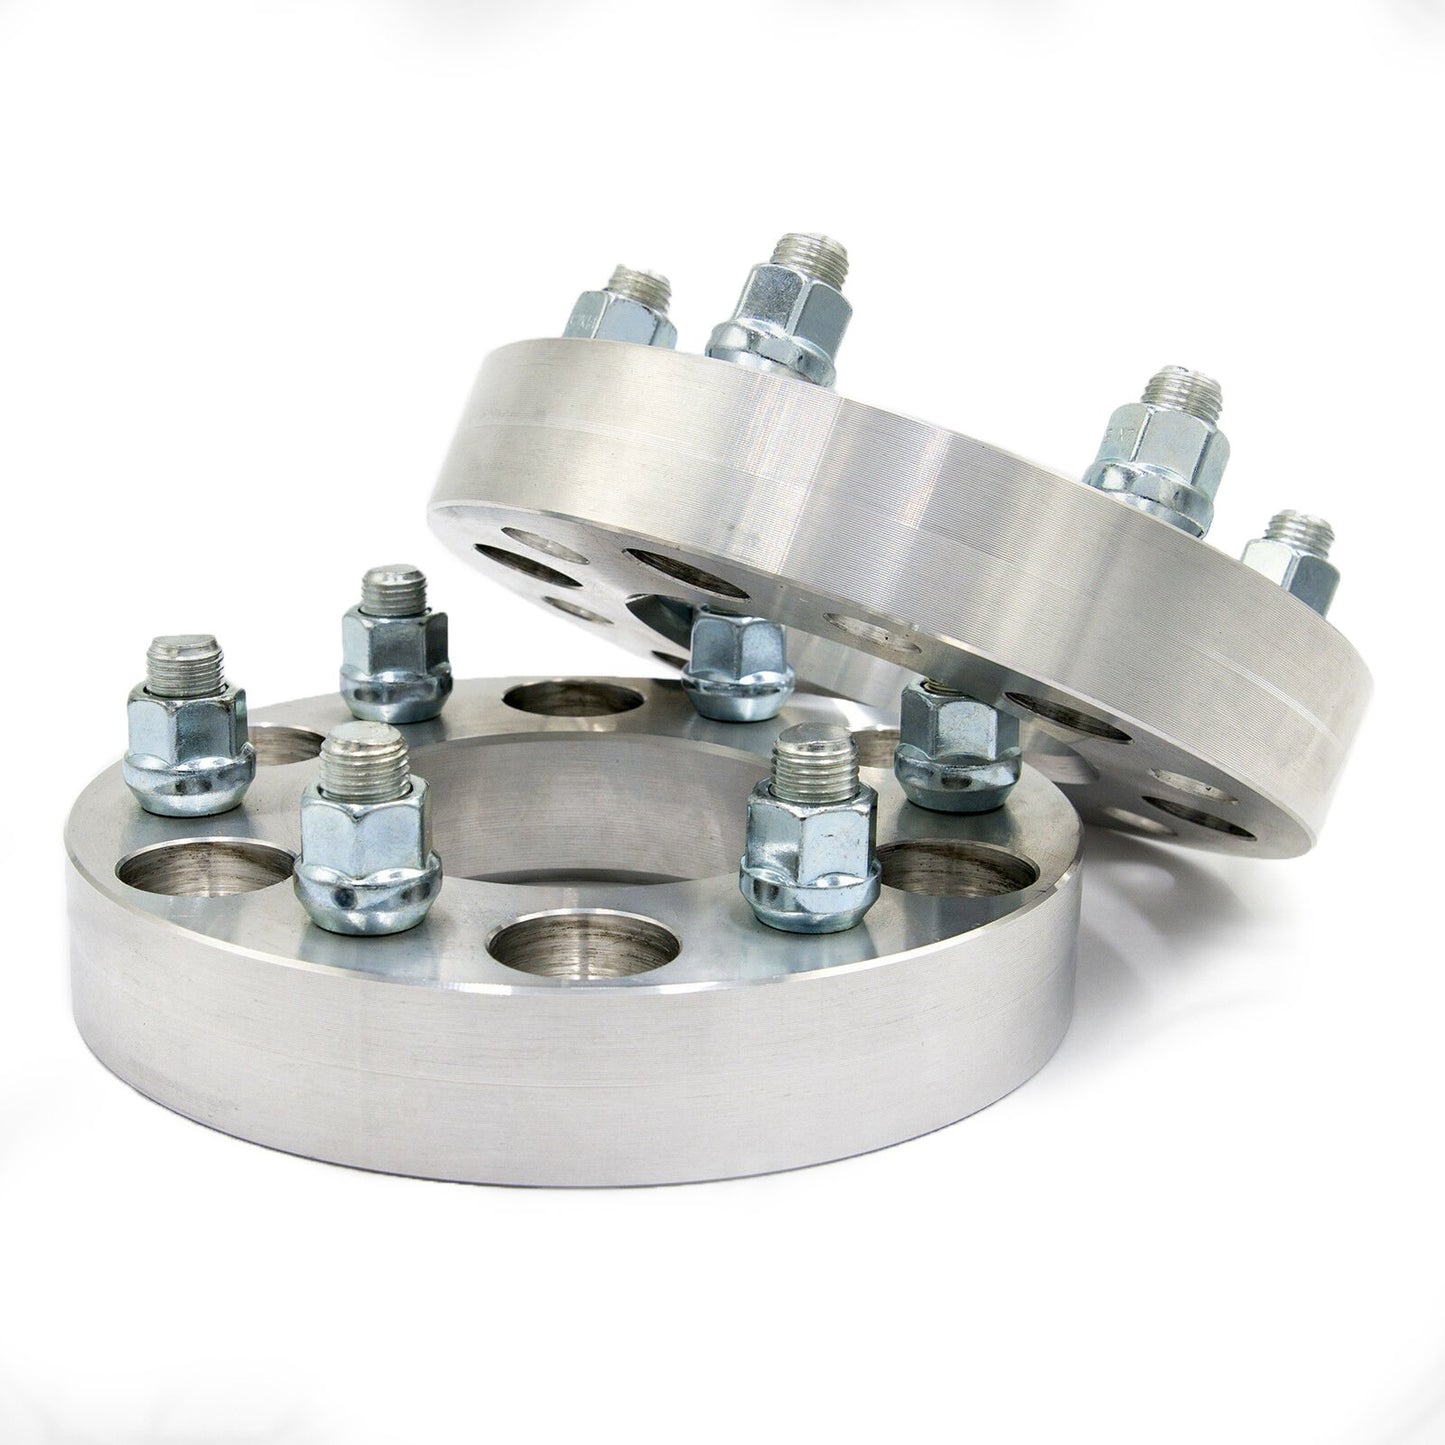 6x115 to 6x5.5" Wheel Spacer/Adapter - Thickness: 3/4"- 4"